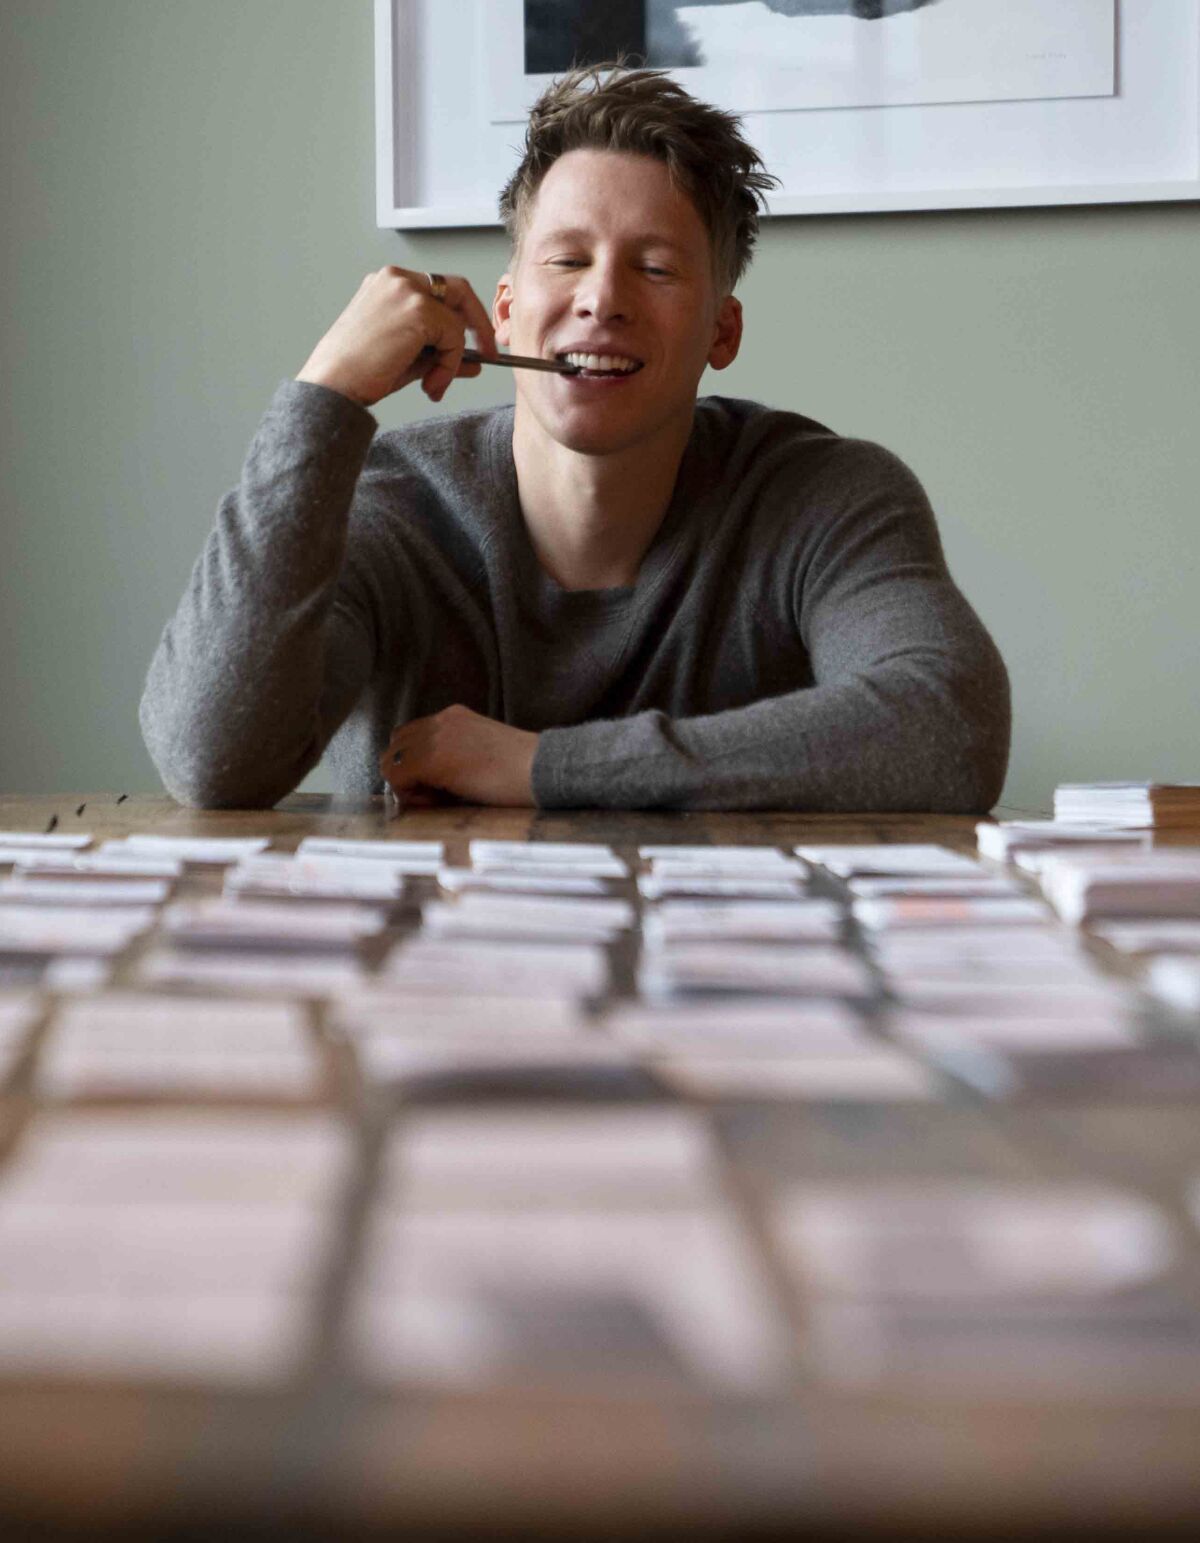 A man with a pen in his mouth sits at a table covered in index cards